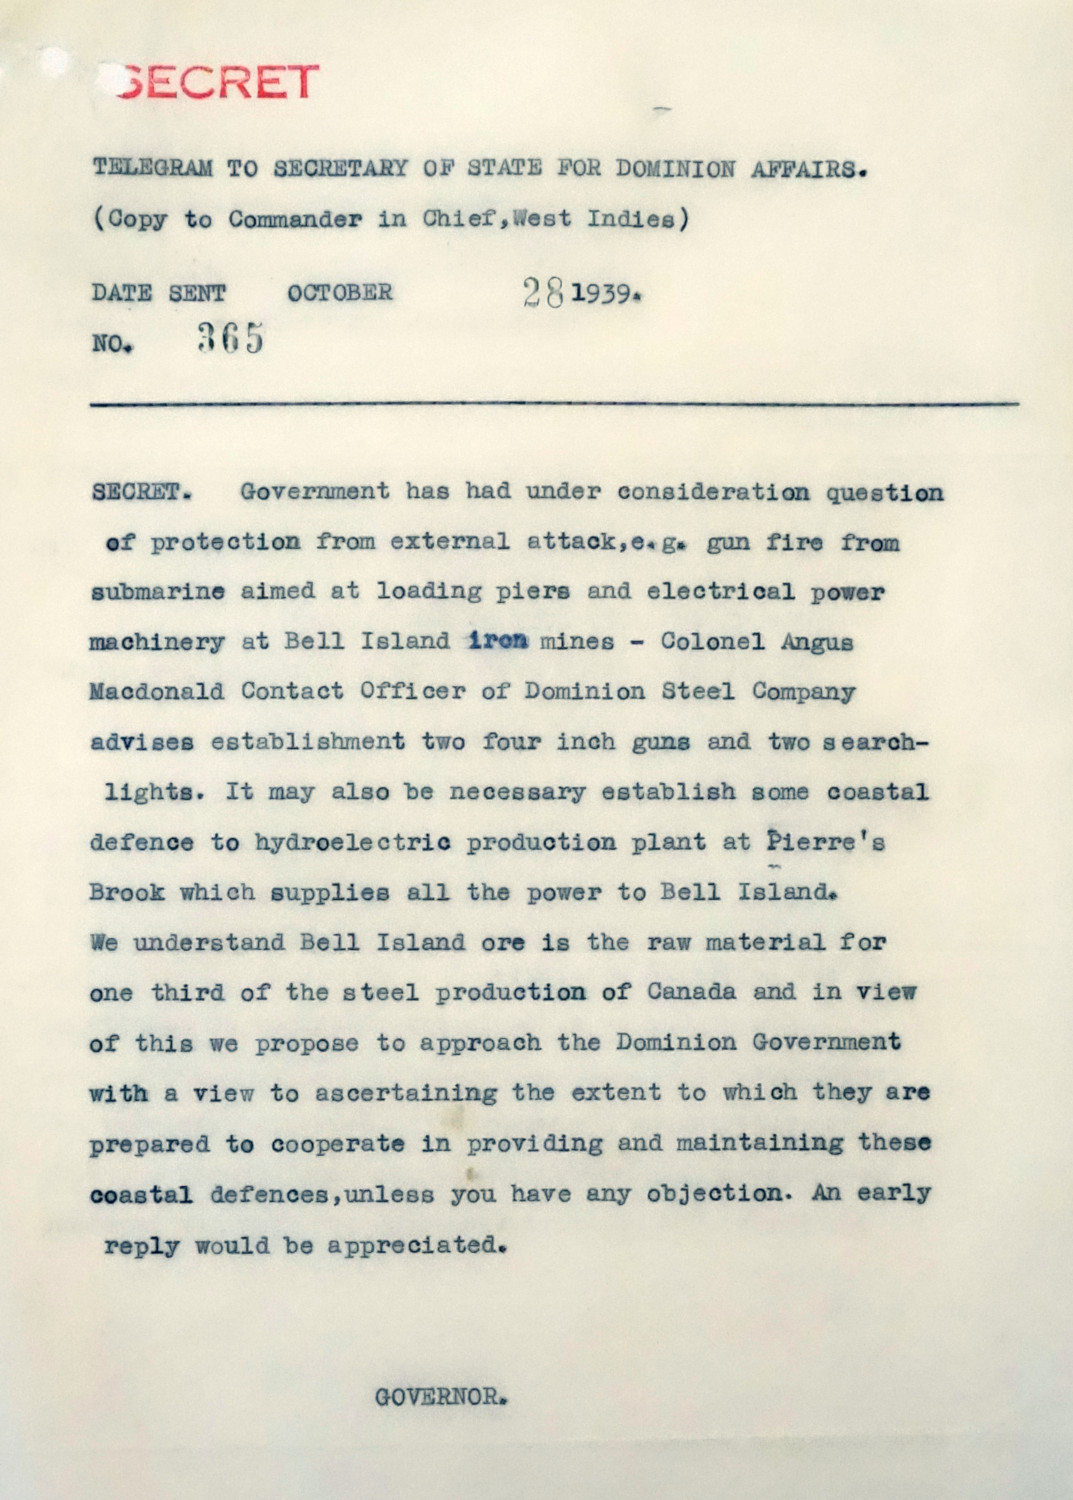 typewritten telegram marked "SECRET" from Newfoundland Governor on need for coastal defences at Bell Island